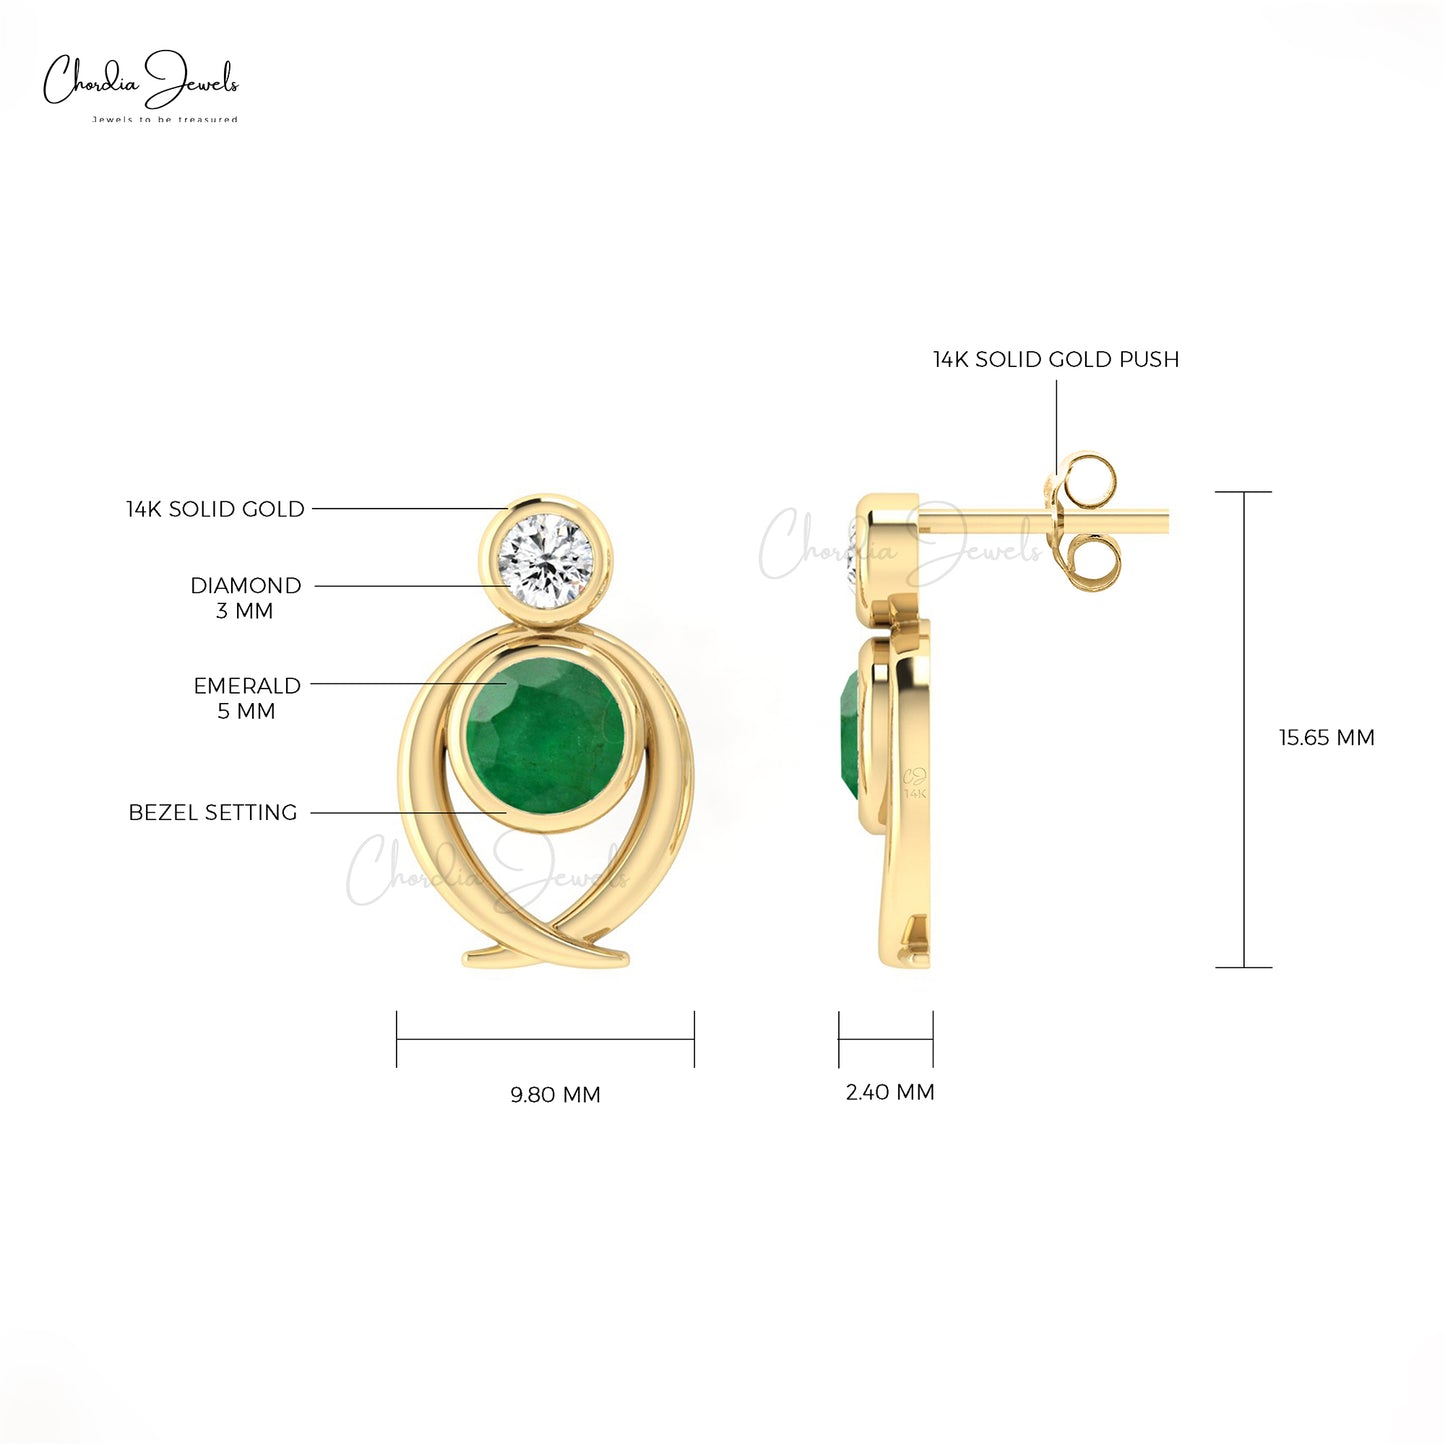 Elevate your style with Emerald two stone earrings